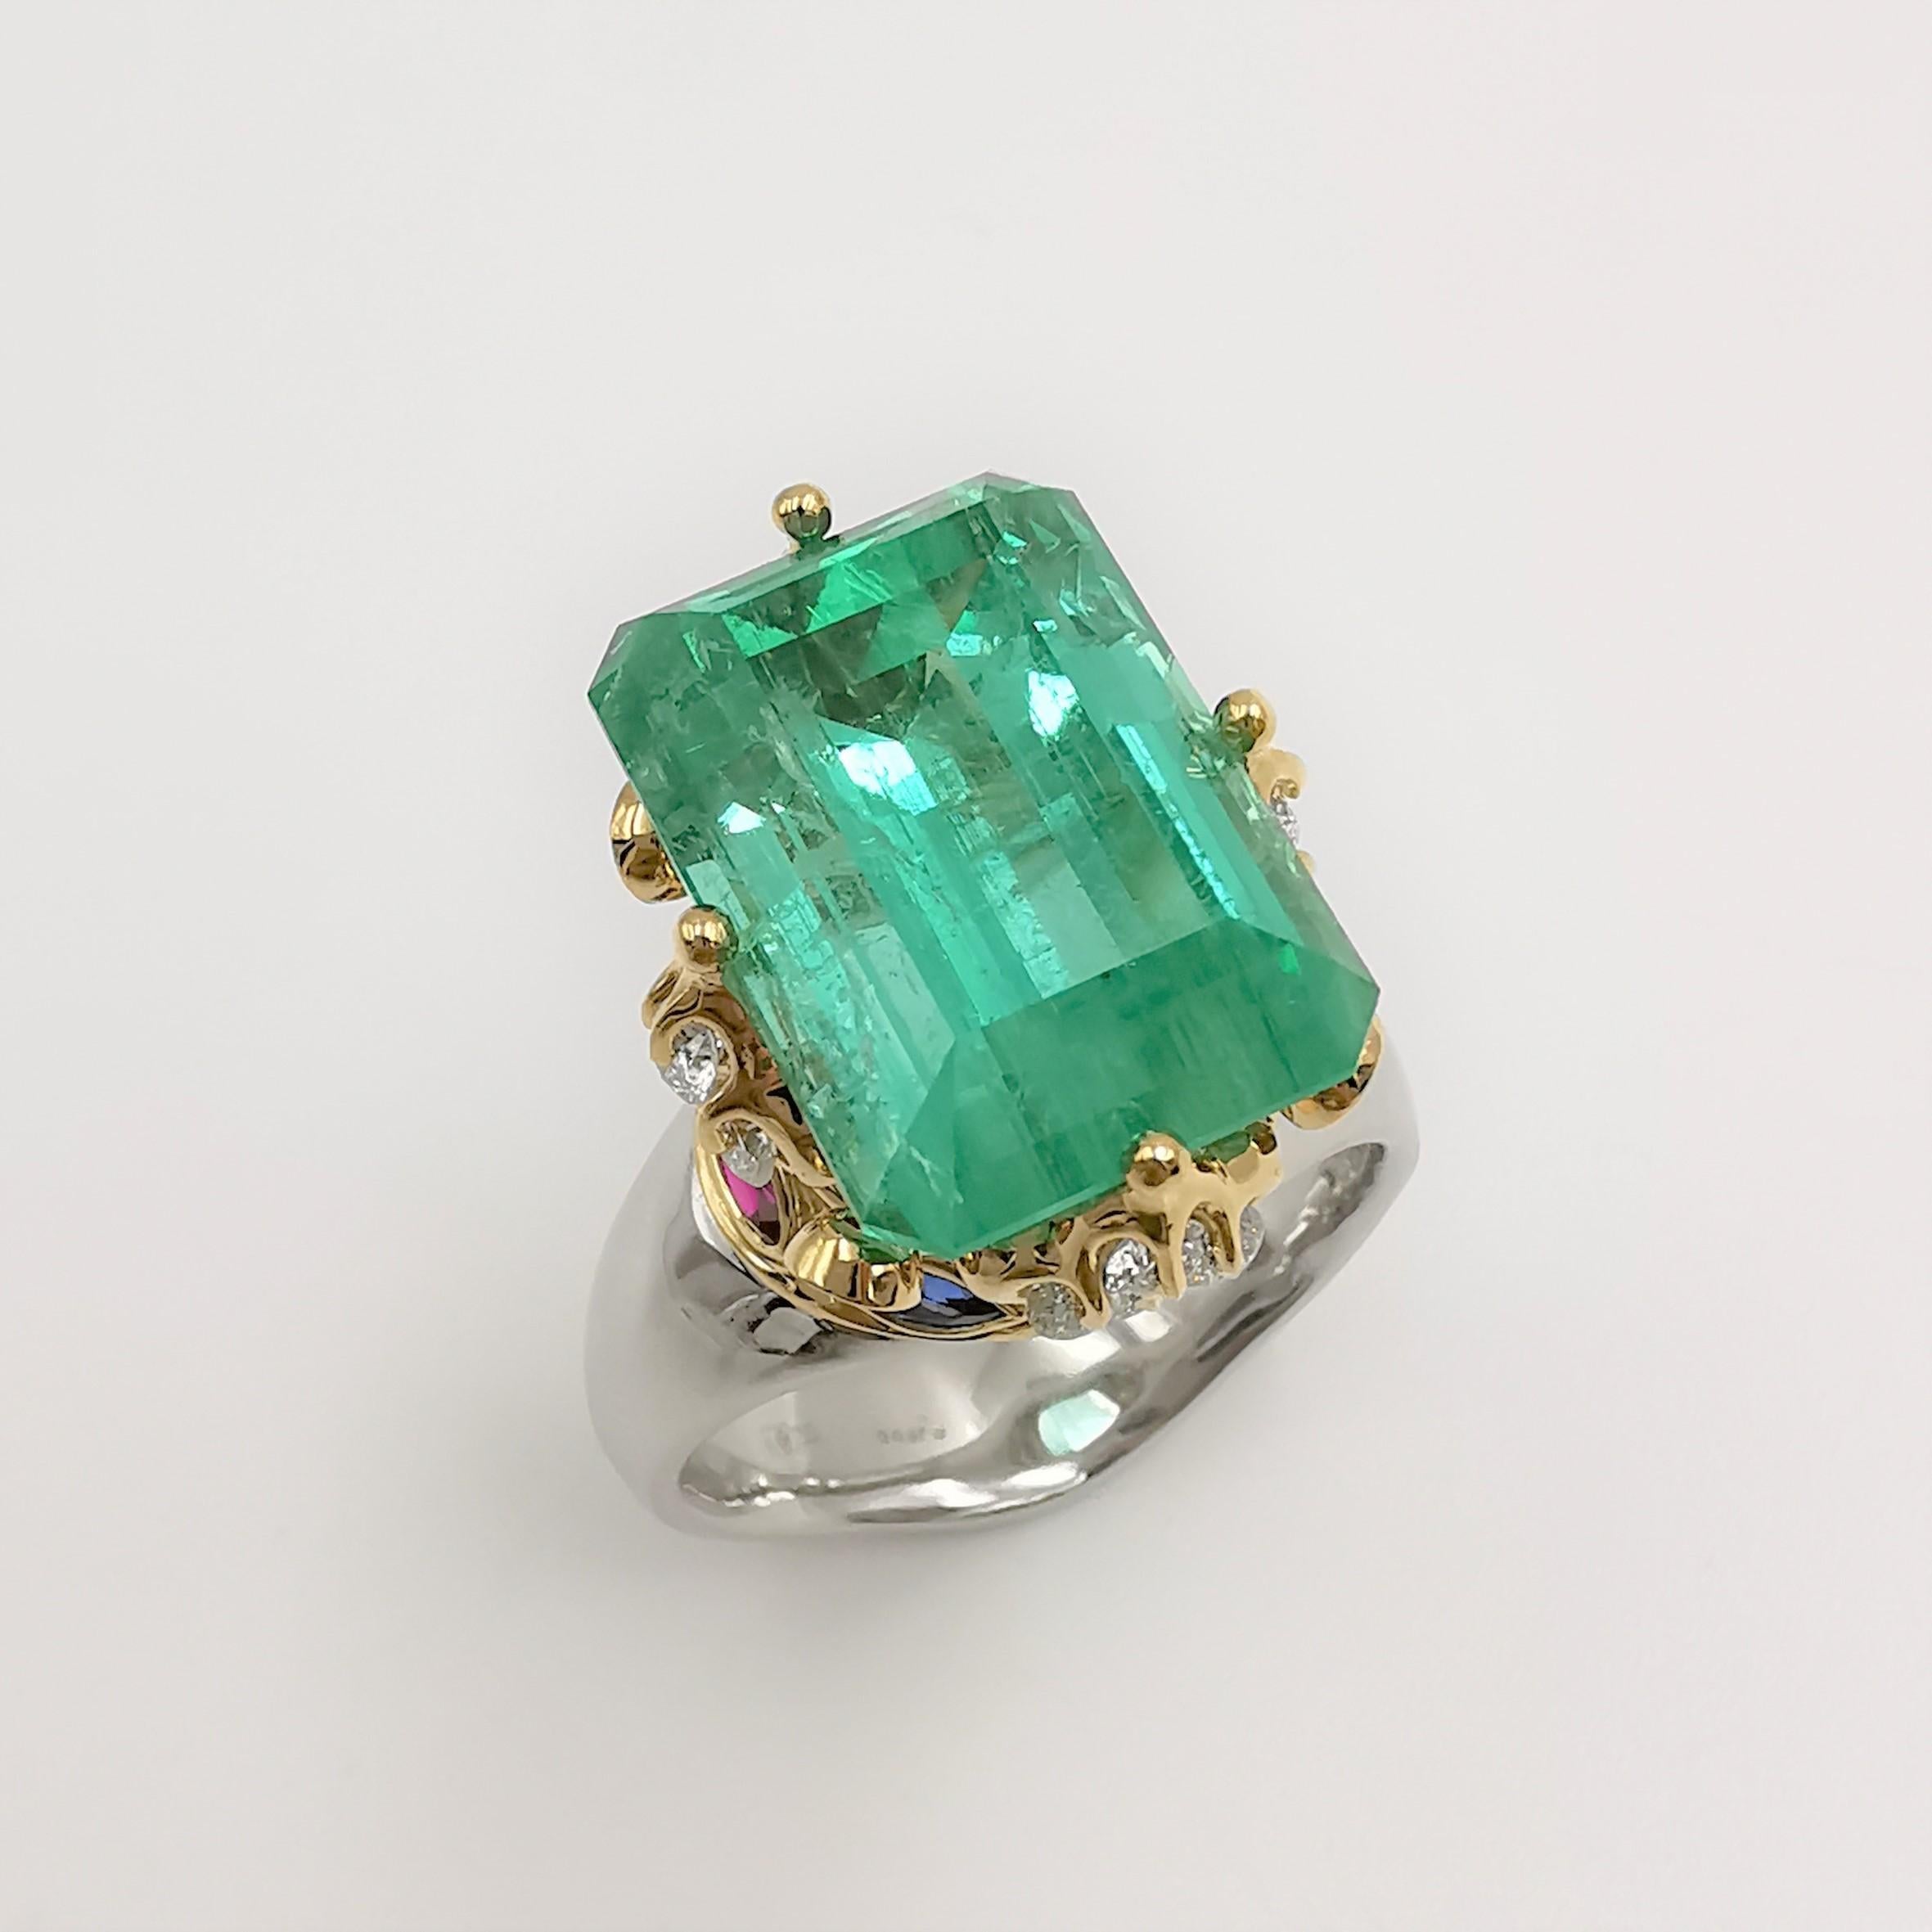 Russian emerlalds are hardly seen on the market nowadays  due to being a private treasury of Tsar, followed by the state. However,  Russia had been one of the biggest emerald producers since 1830's  discovery in the Ural mountains so that world